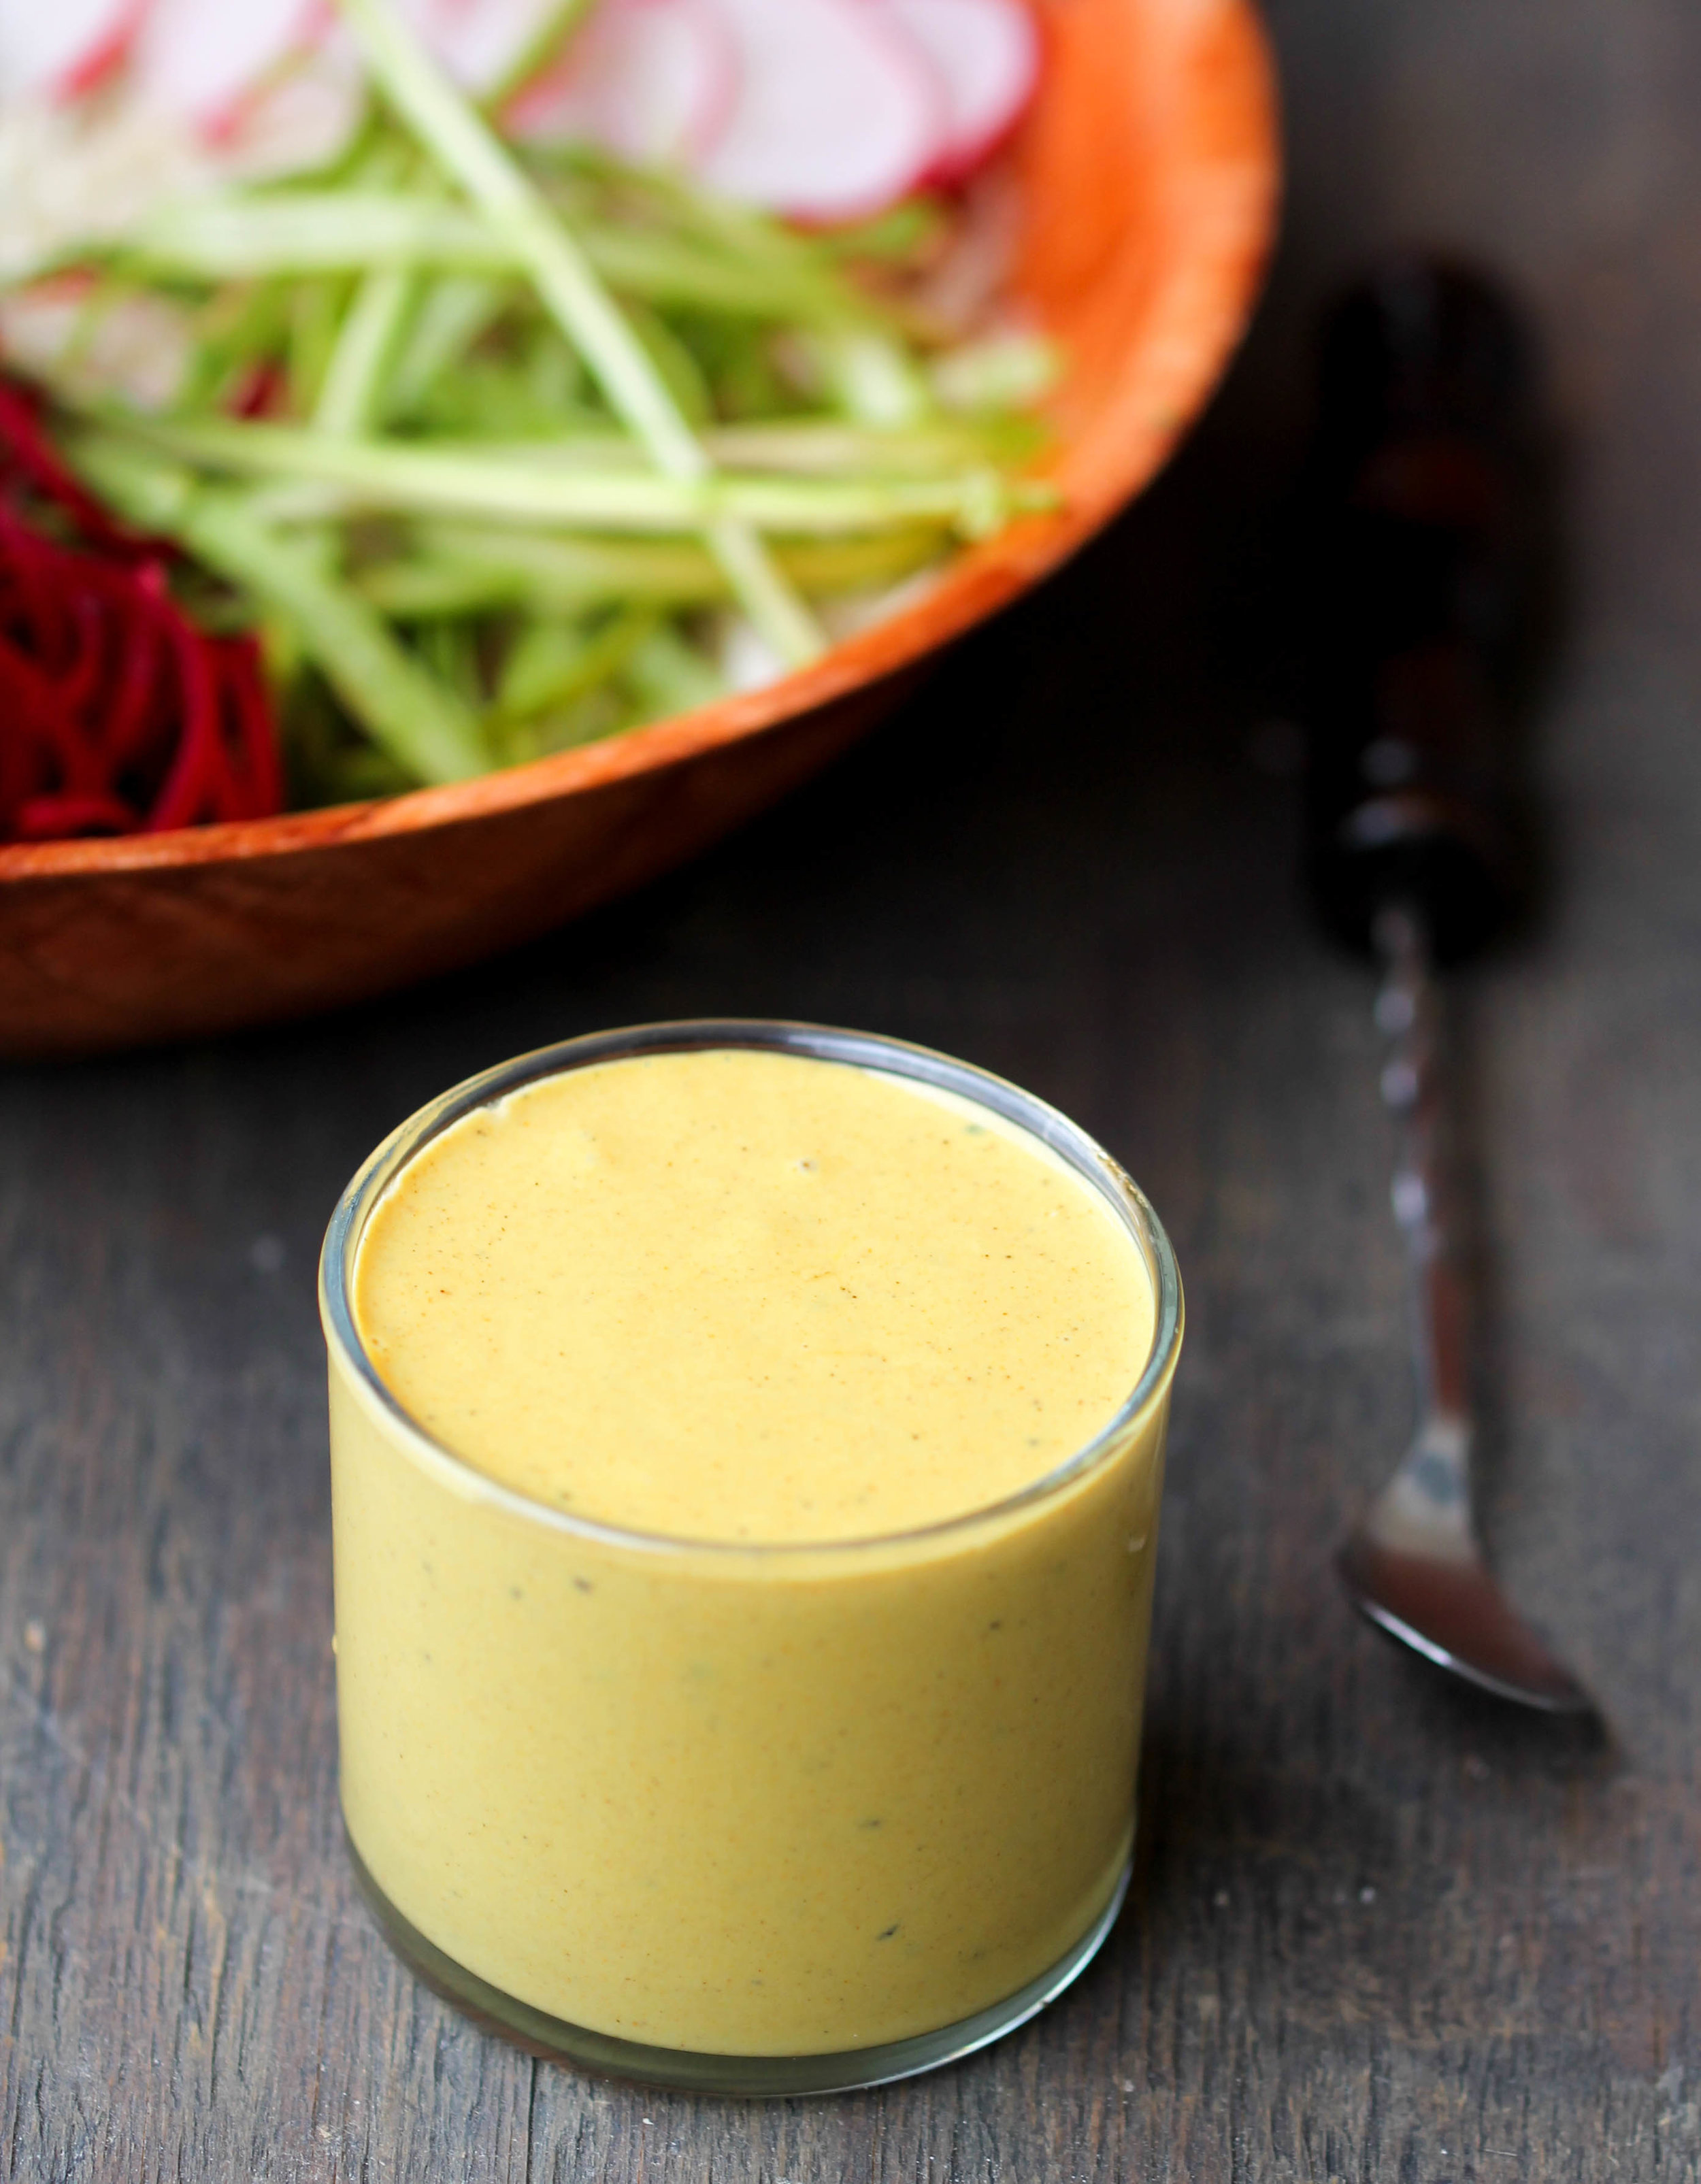 Spring Veggies with Tahini Turmeric Dressing will make eating veggies so much more exciting and adds a nutrition boost into your life with simple, flexible, easy to find ingredients.